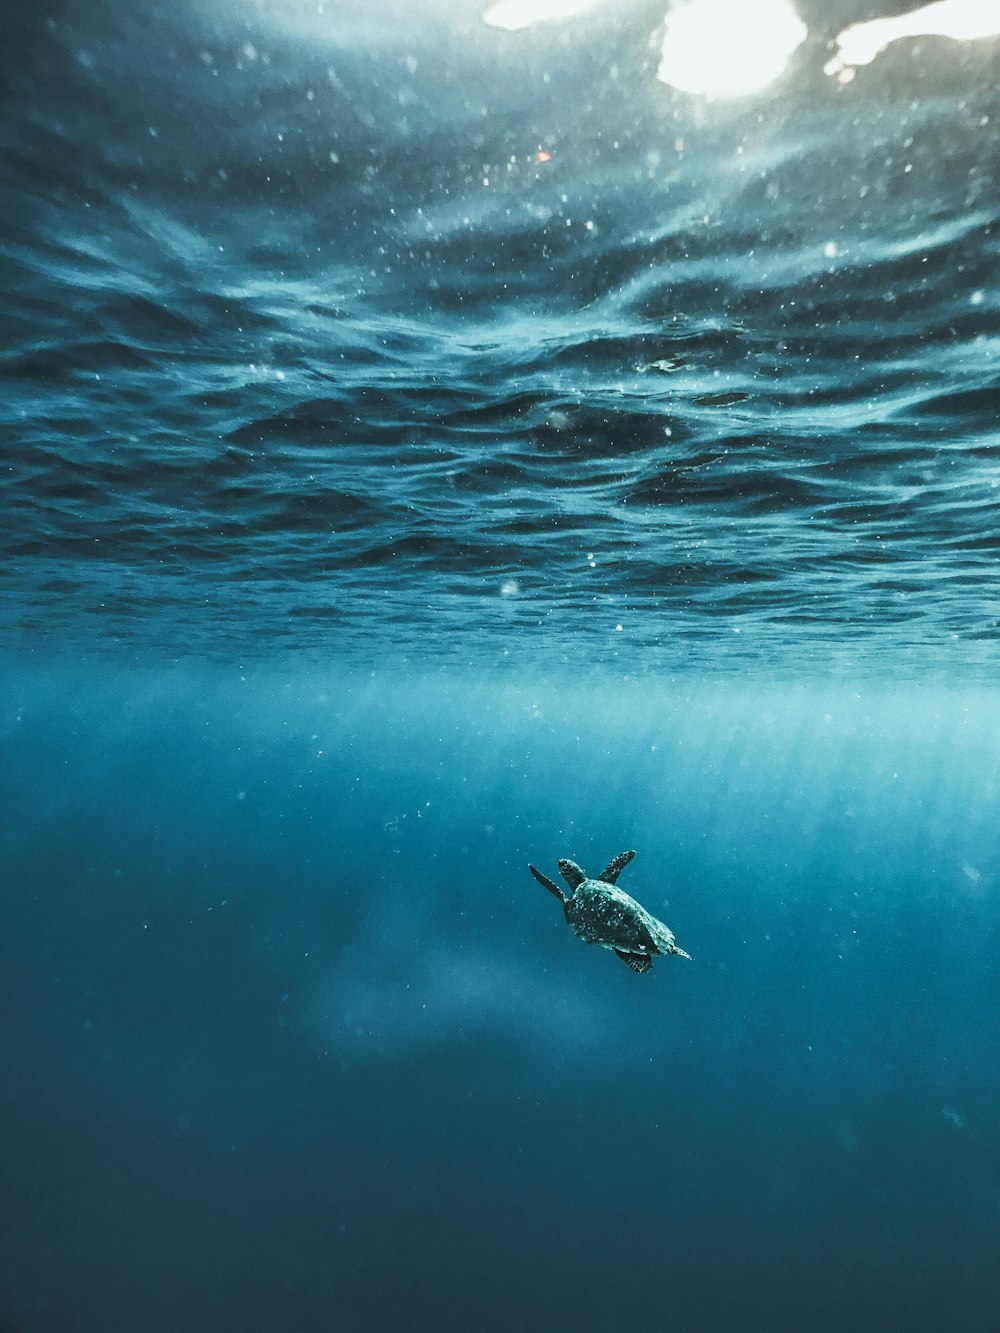 100+ Underwater Images | Download Free Images & Stock Photos on Unsplash